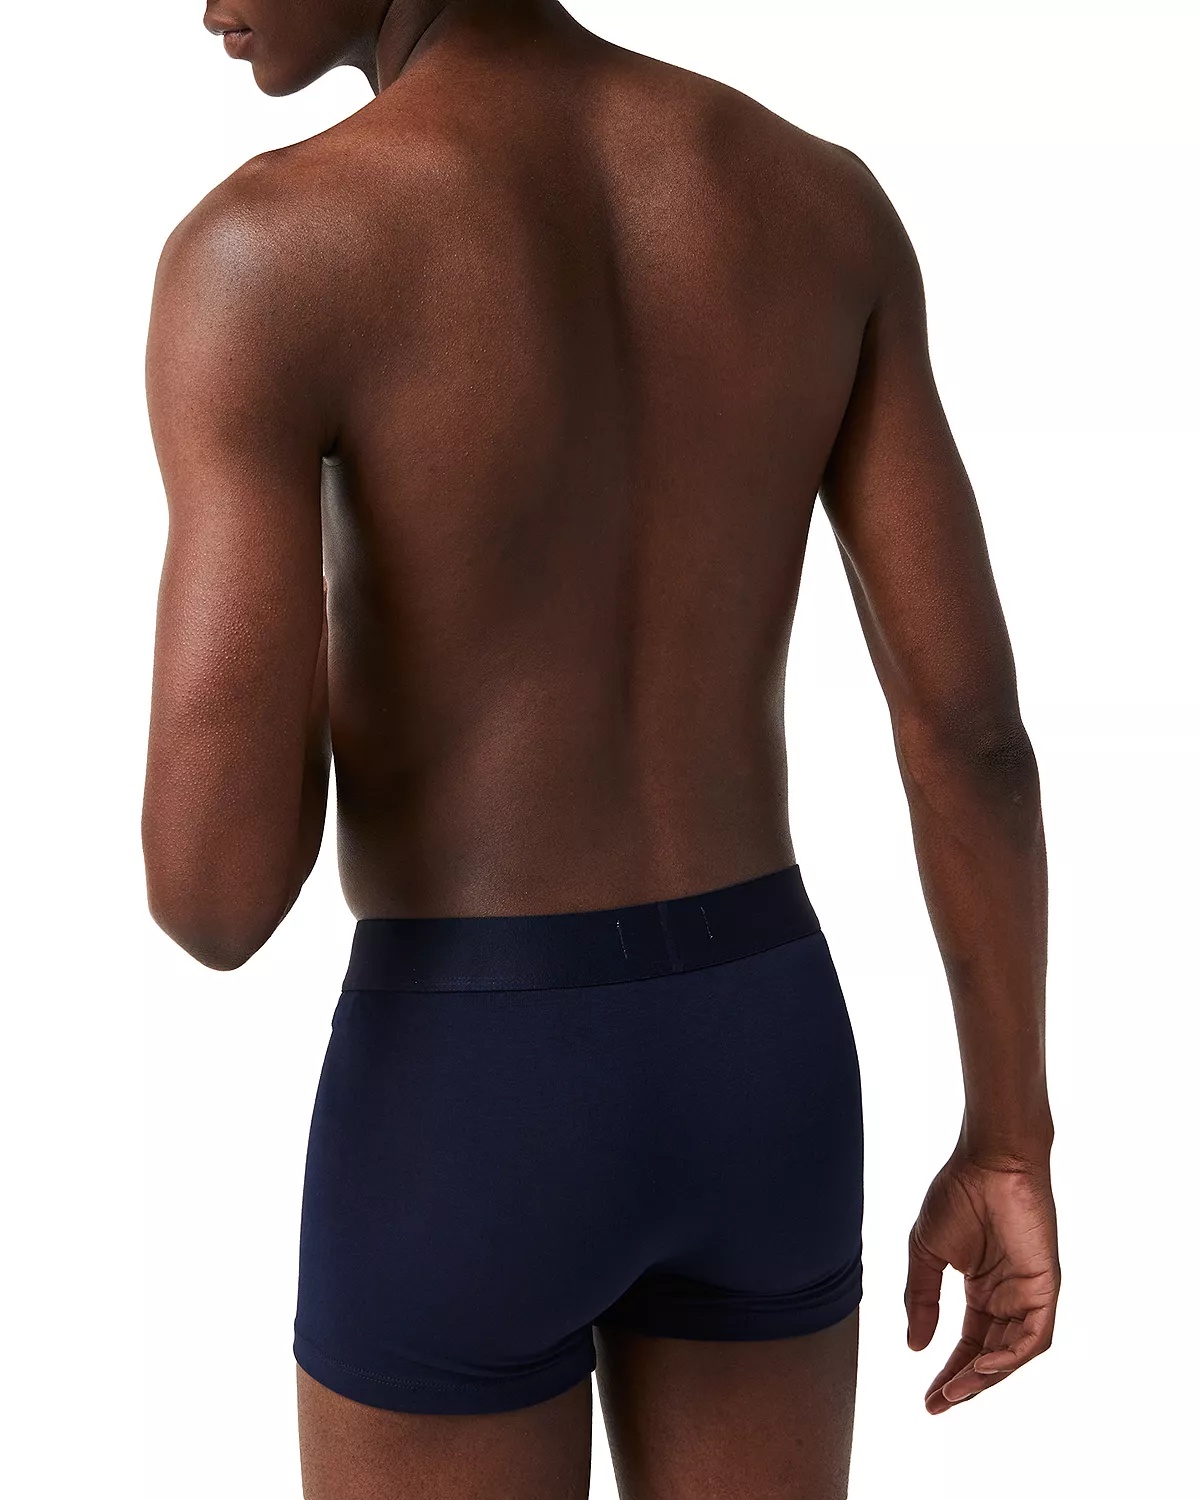 Cotton Stretch Trunks, Pack of 3 - 3